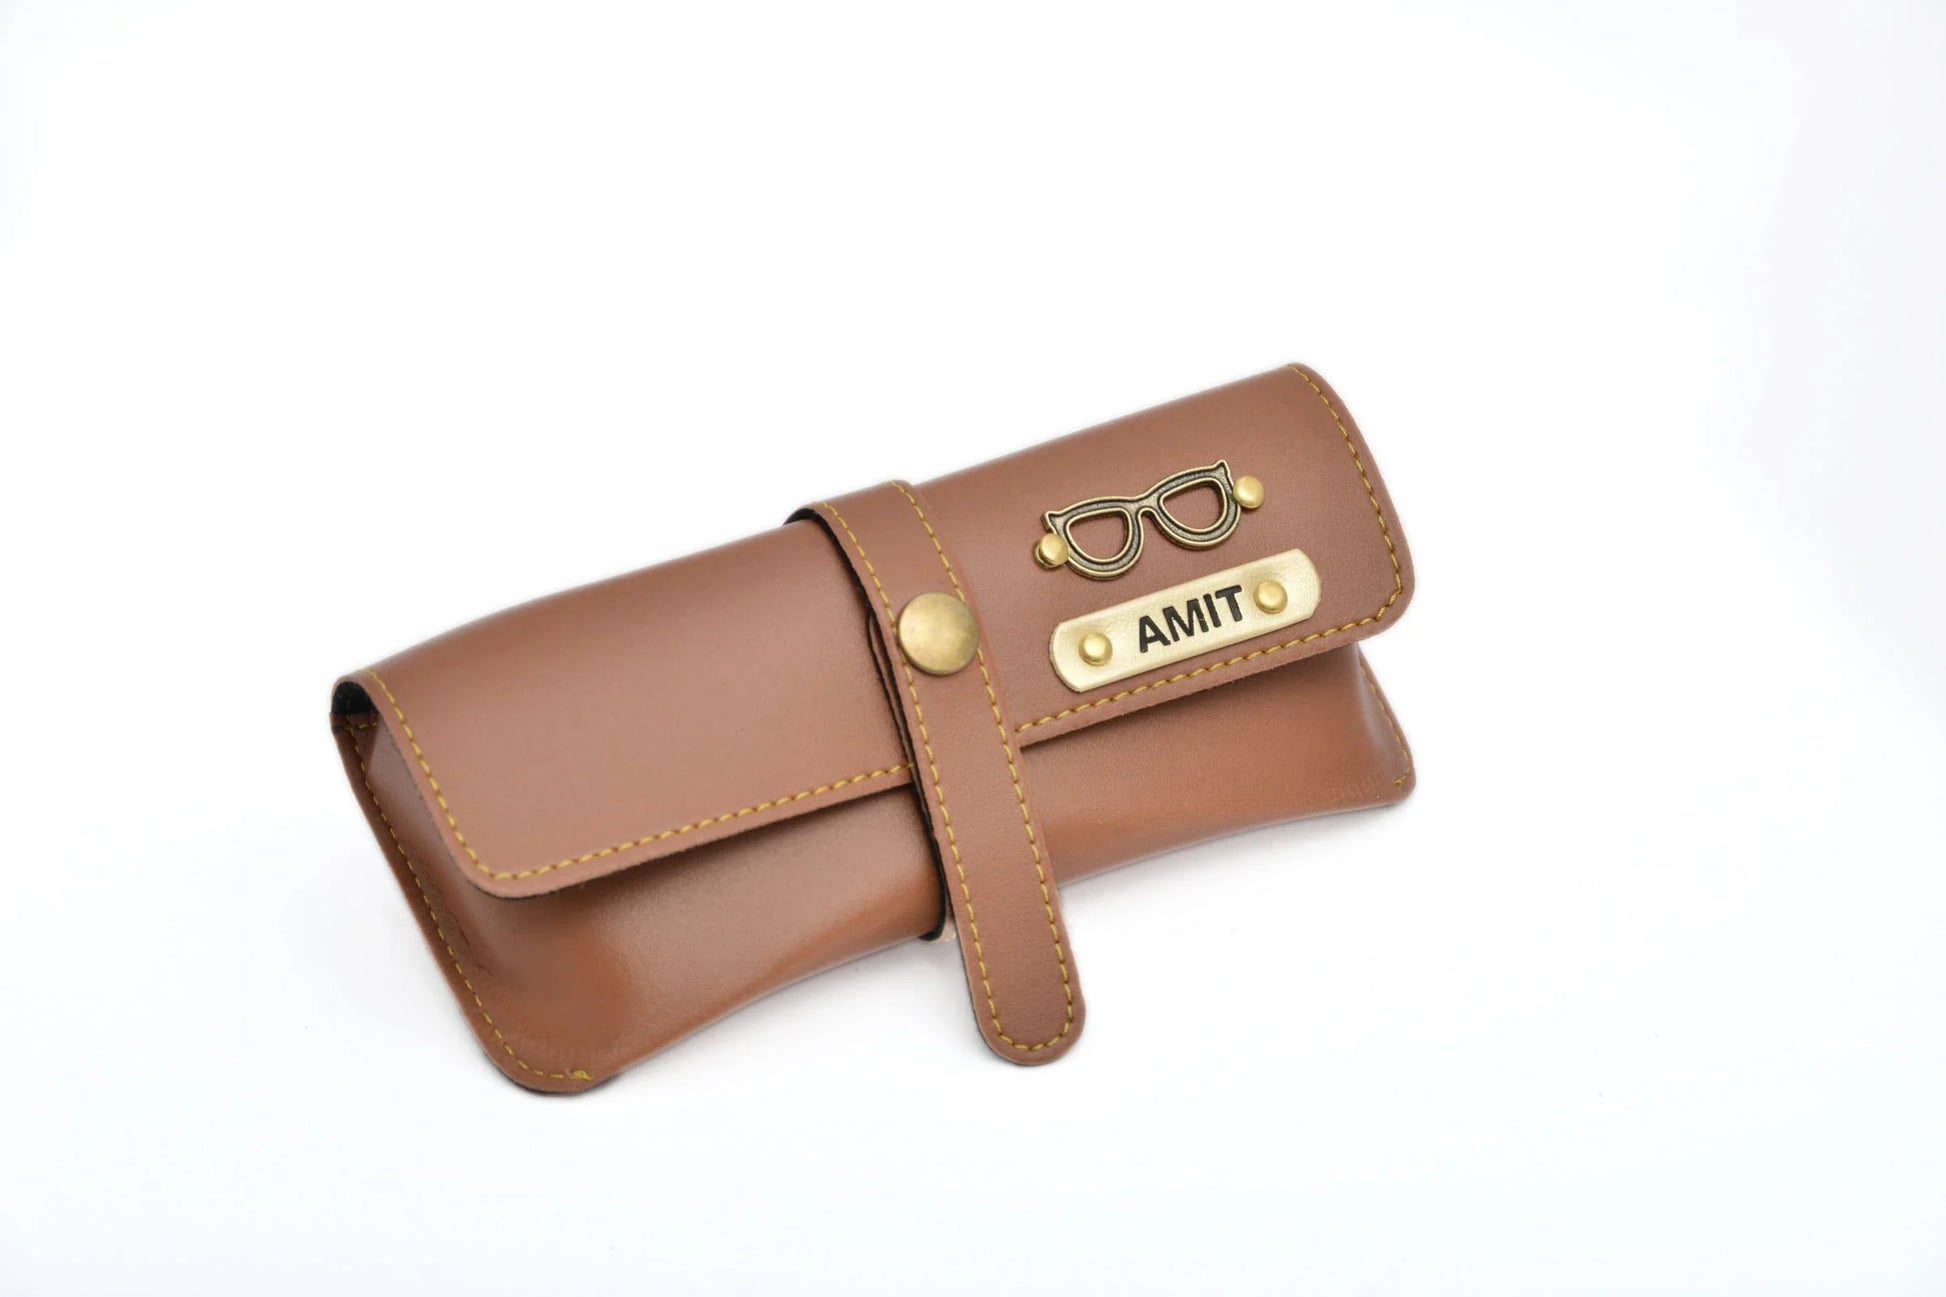 Our compact eyewear case is perfect for on-the-go, protecting your glasses wherever you go.